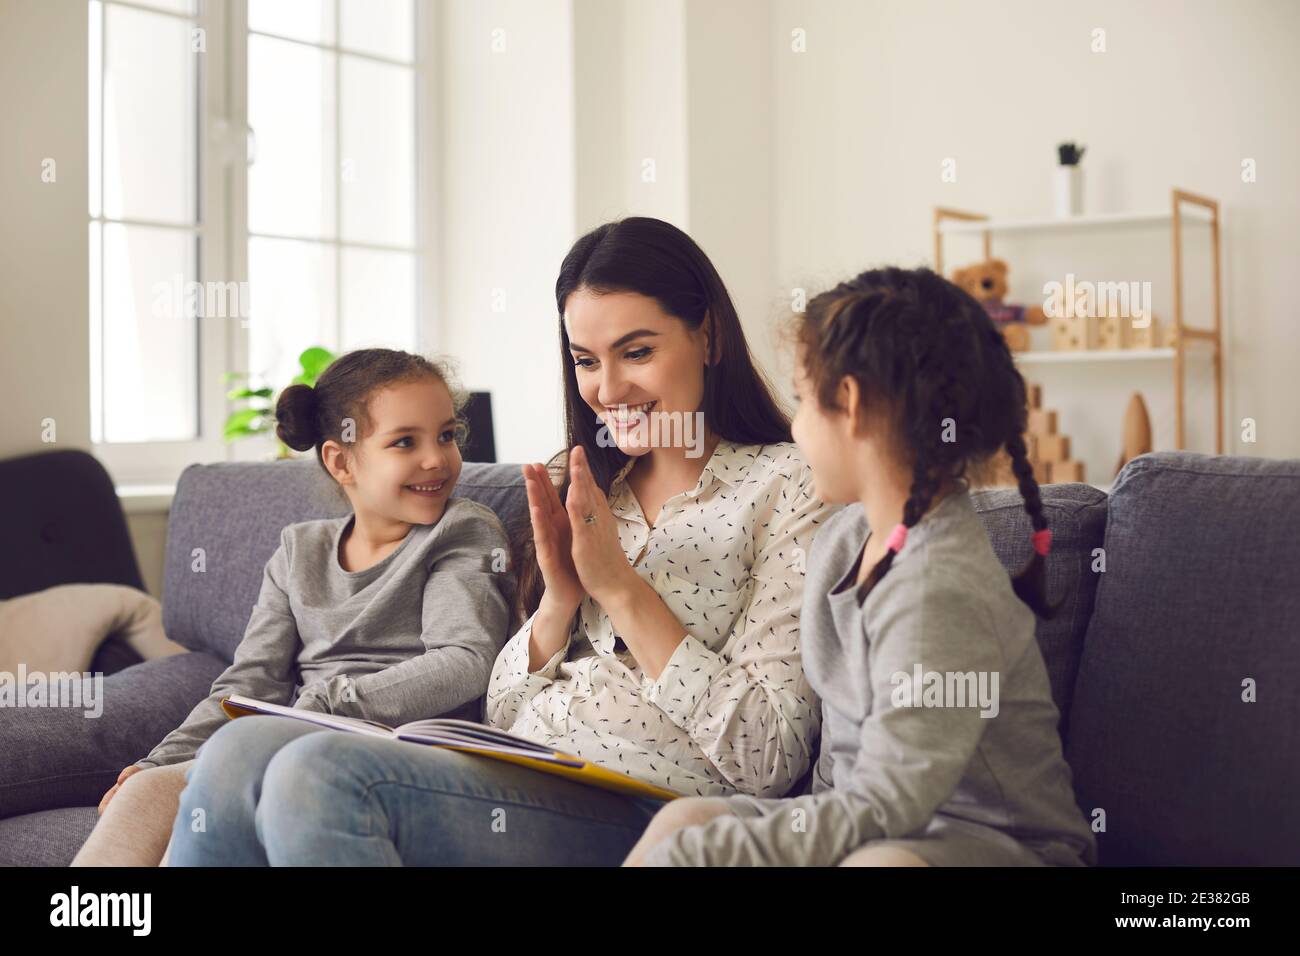 Caring smiling mom reading a book with her two little daughters sitting on the couch at home. Stock Photo